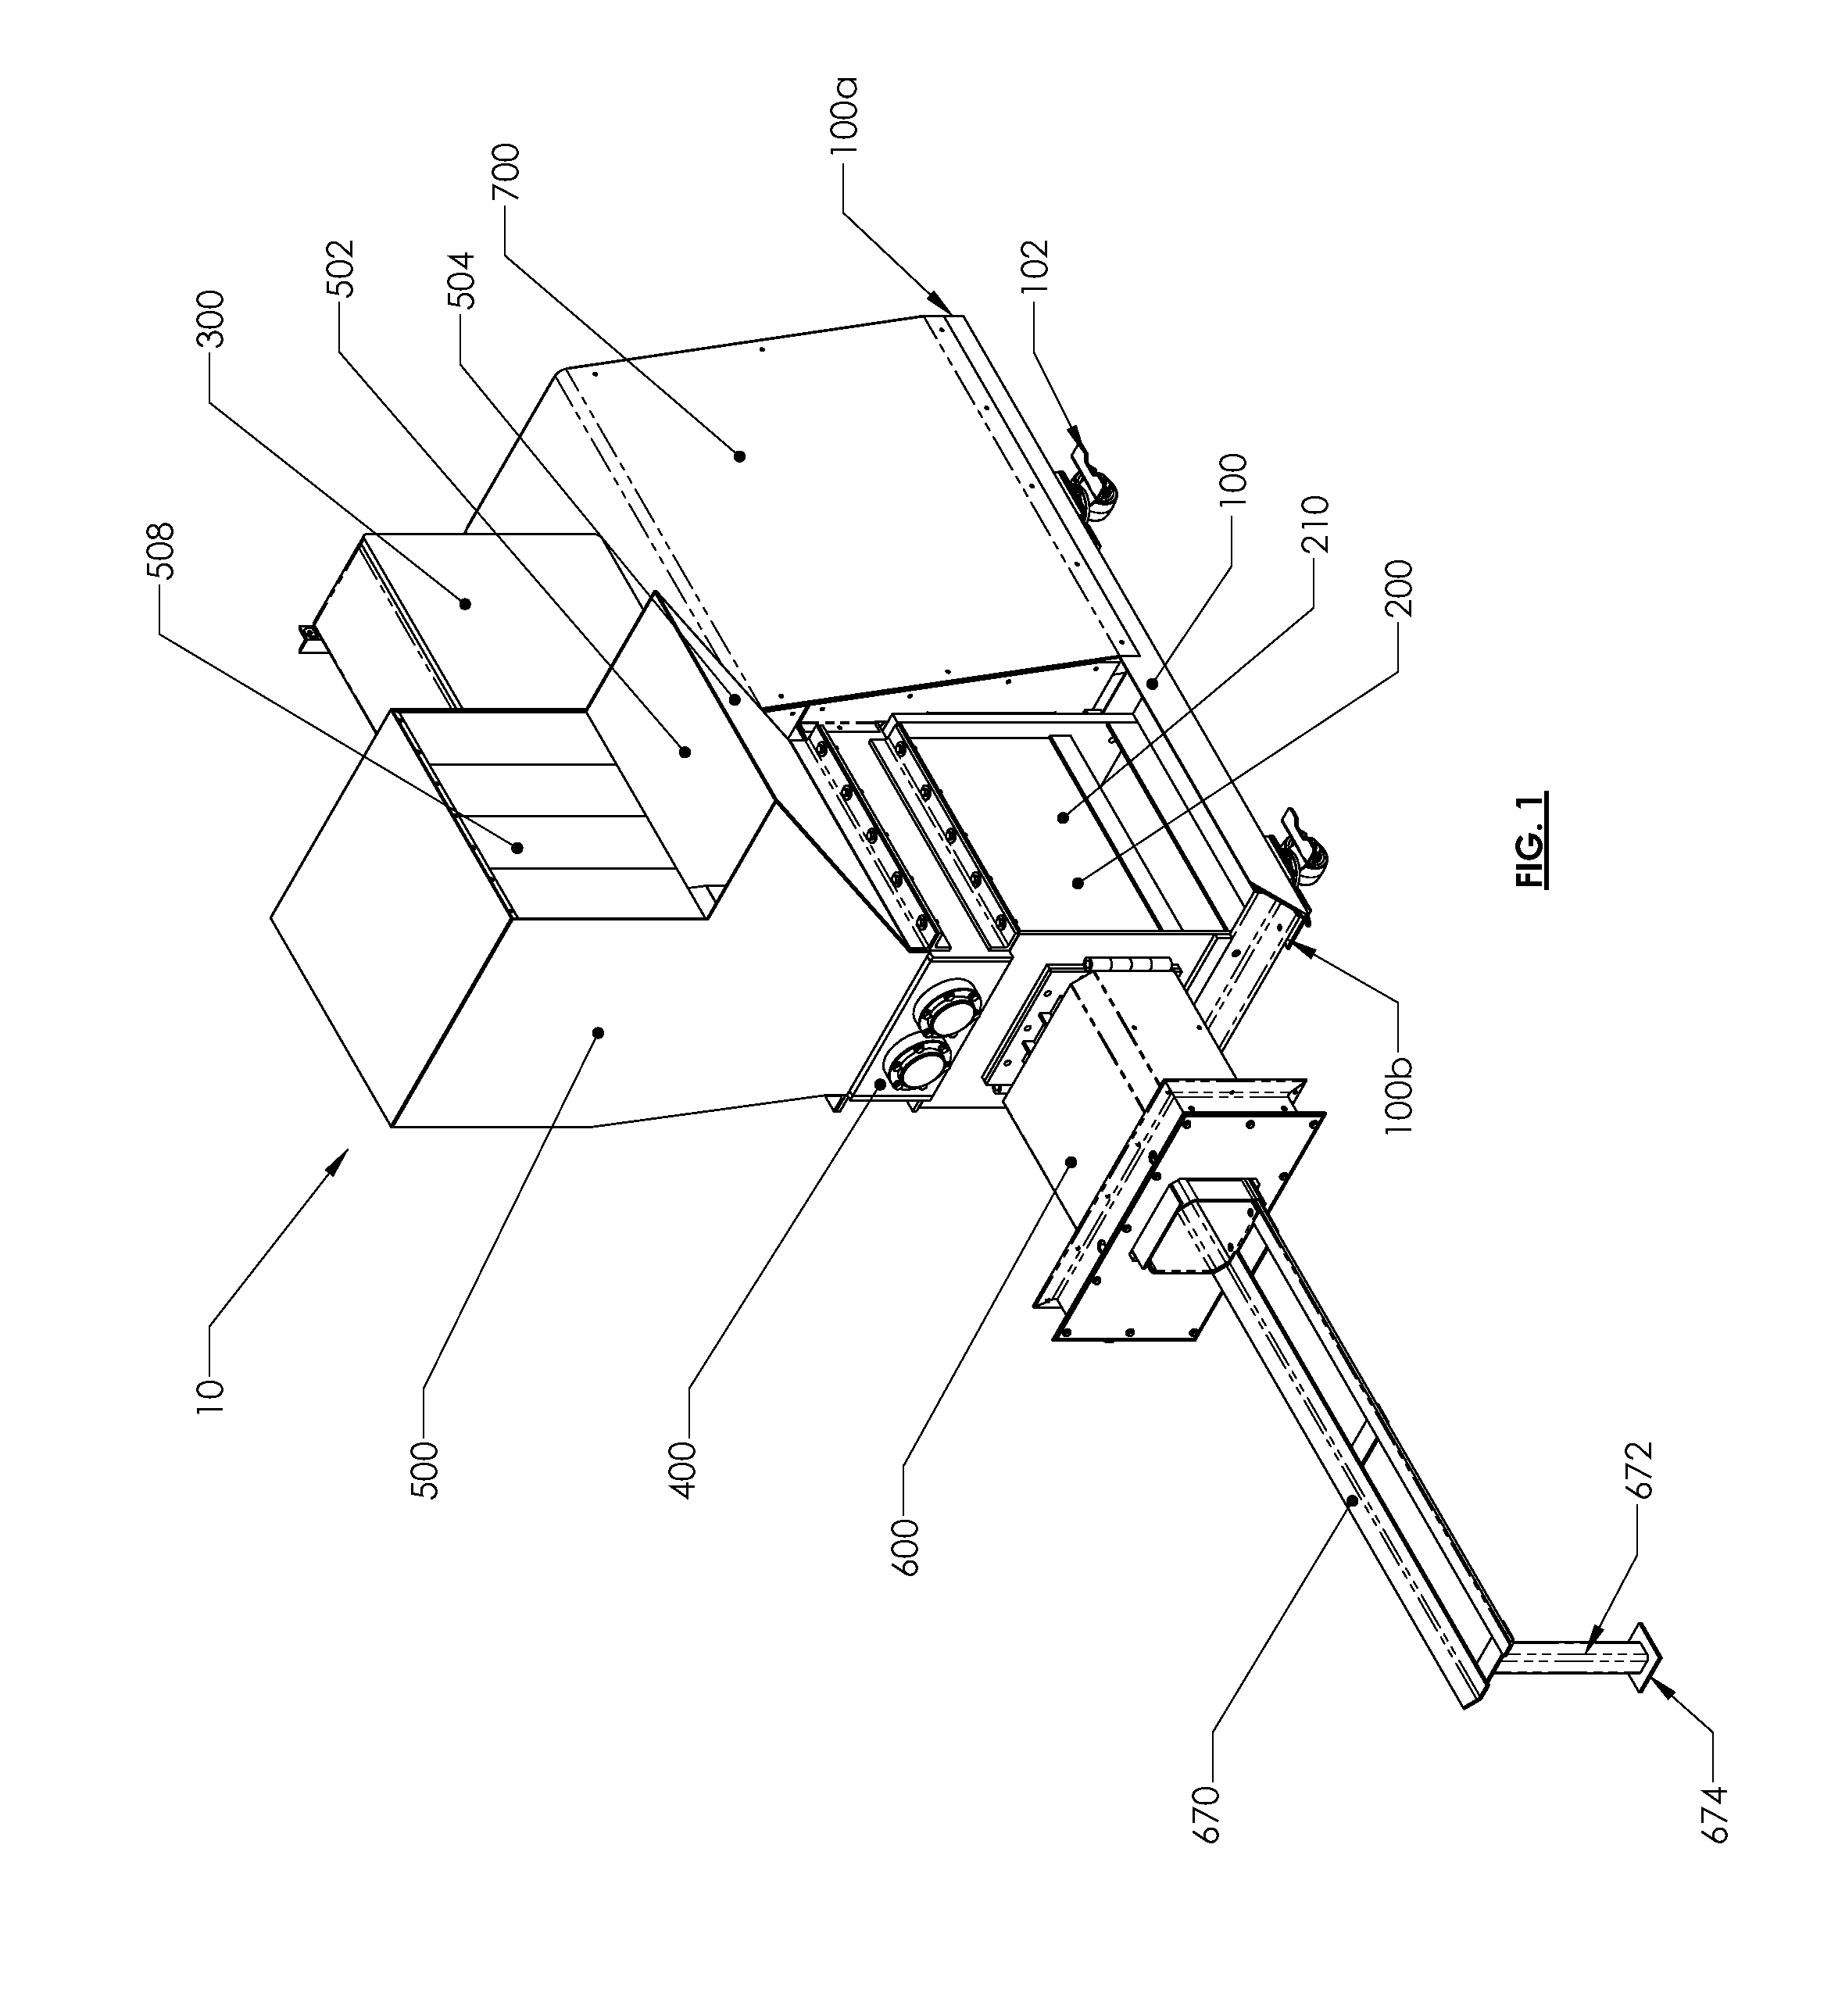 System and method for adjusting and cooling a densifier